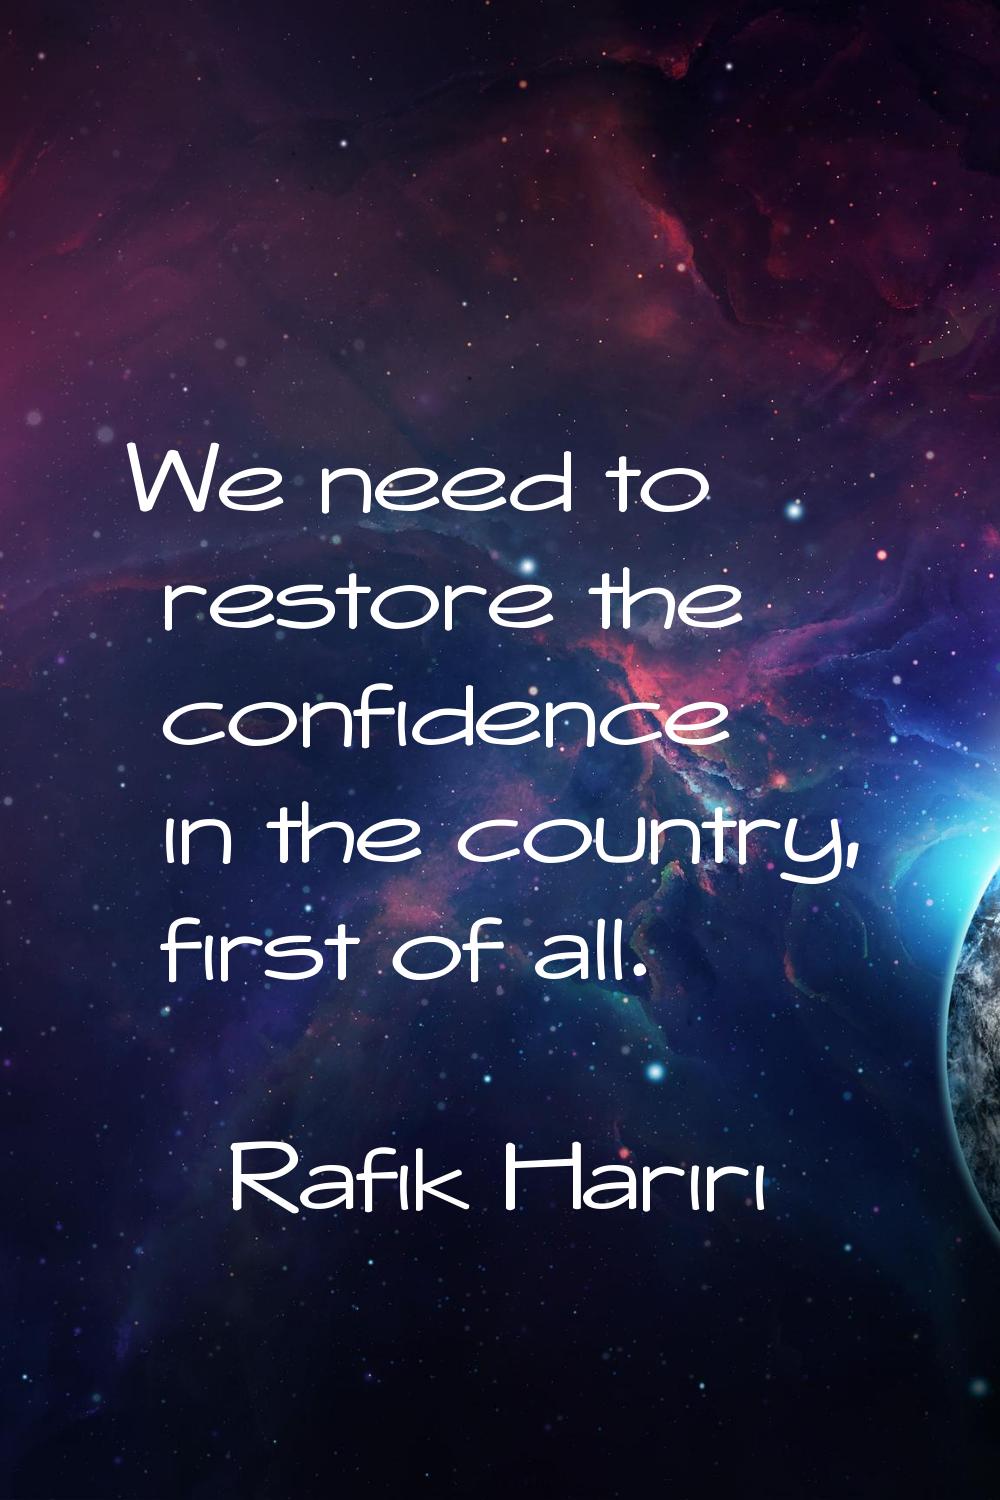 We need to restore the confidence in the country, first of all.